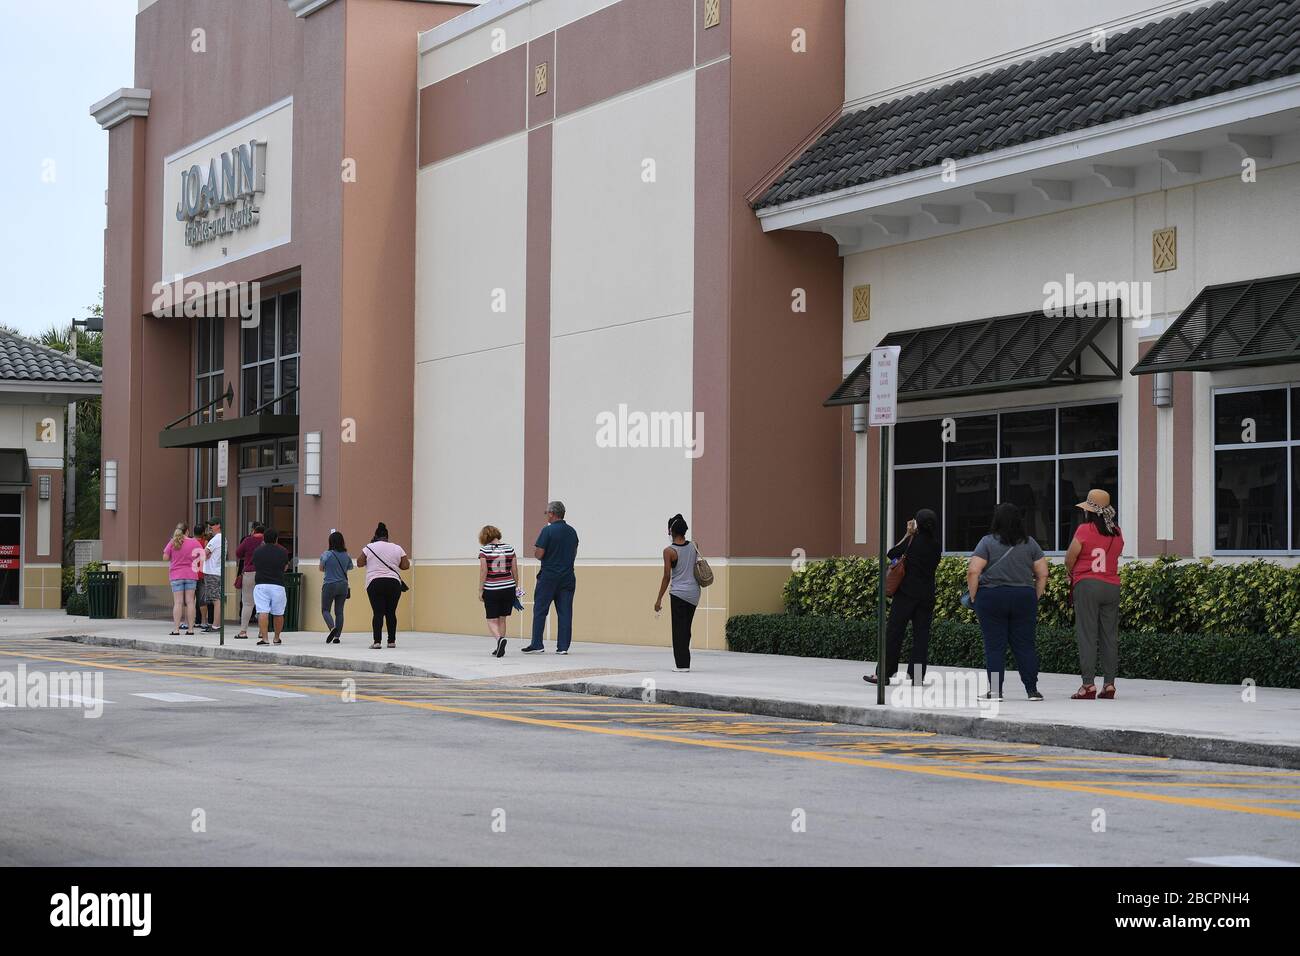 COCONUT CREEK, FL - APRIL 04: Shoppers line up outside Joann Fabrics and Crafts to get material to make masks due to the Coronavirus (COVID-19) pandemic on April 4, 2020 in Coconut Creek, Florida. Credit: mpi04/MediaPunch Stock Photo